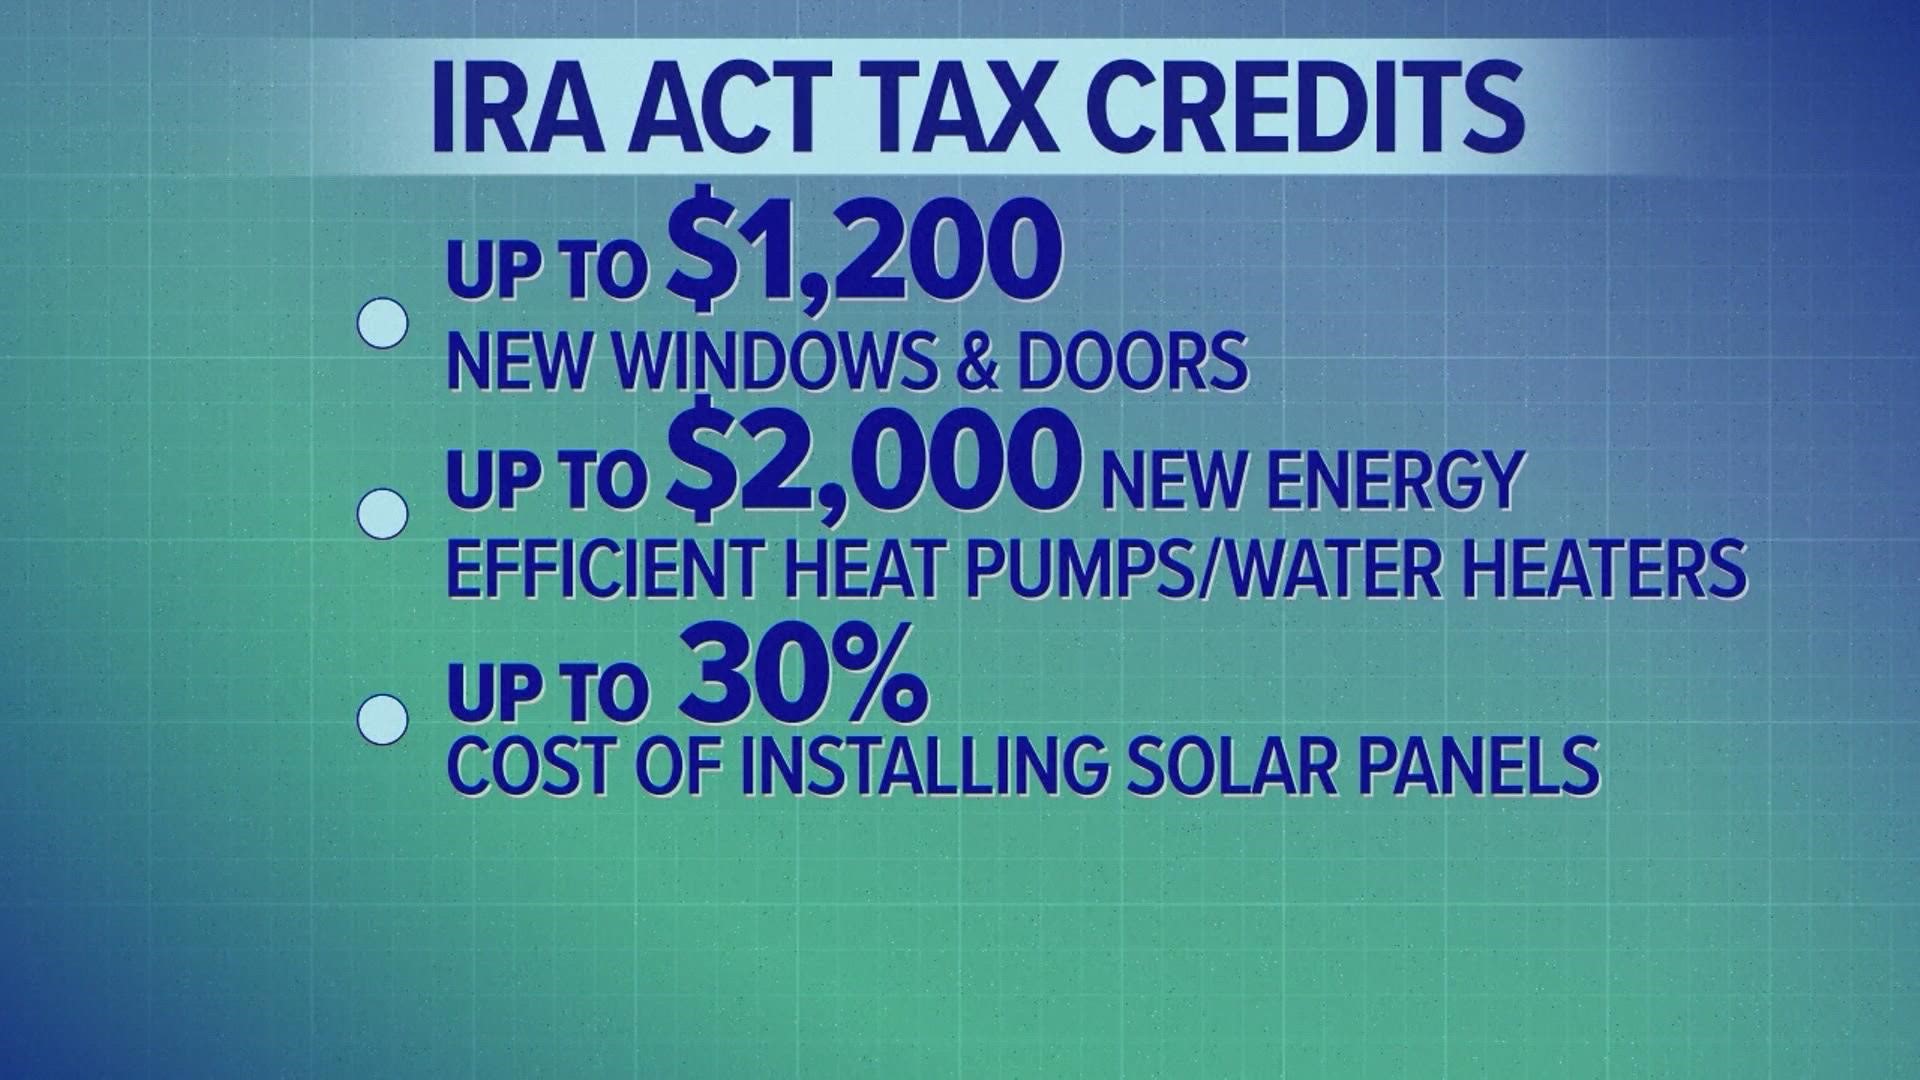 ABC News tagged along on an energy audit where an expert founds ways for a woman to lower her energy bill.